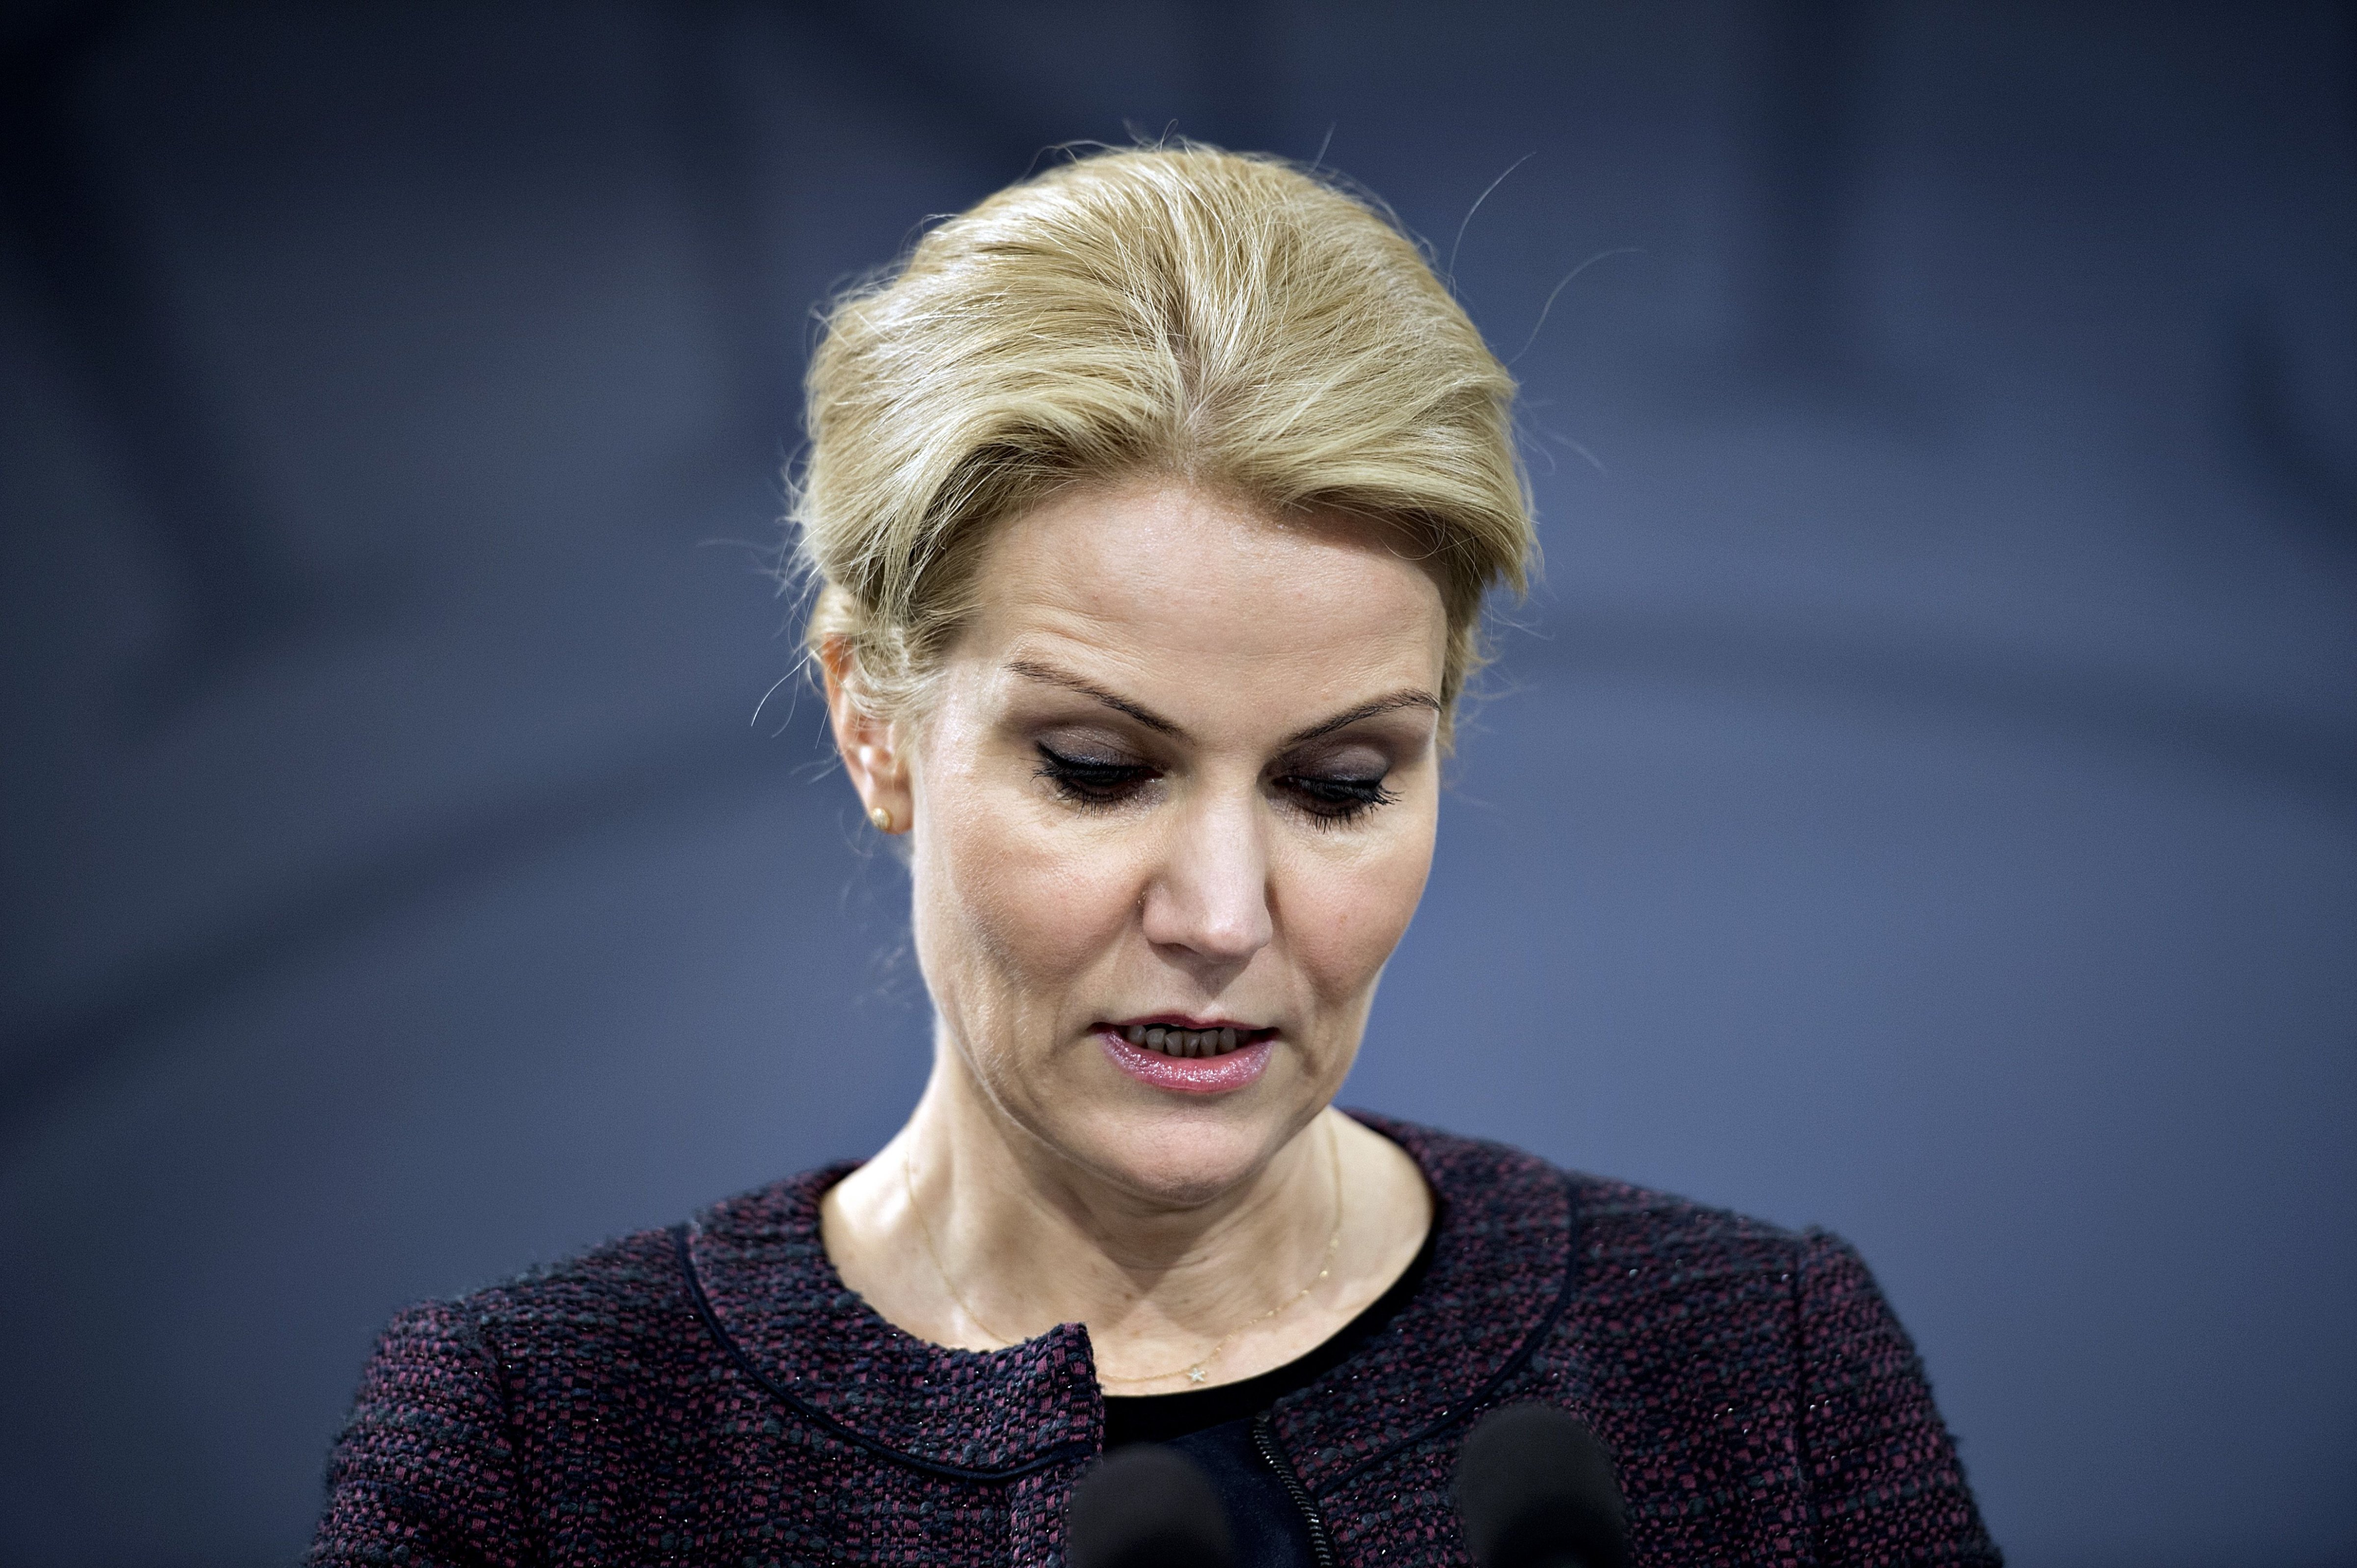 Danish Prime Minister Helle Thorning-Schmidt at a press conference on Jan. 30, 2014 at the Prime Minister's office in Copenhagen.